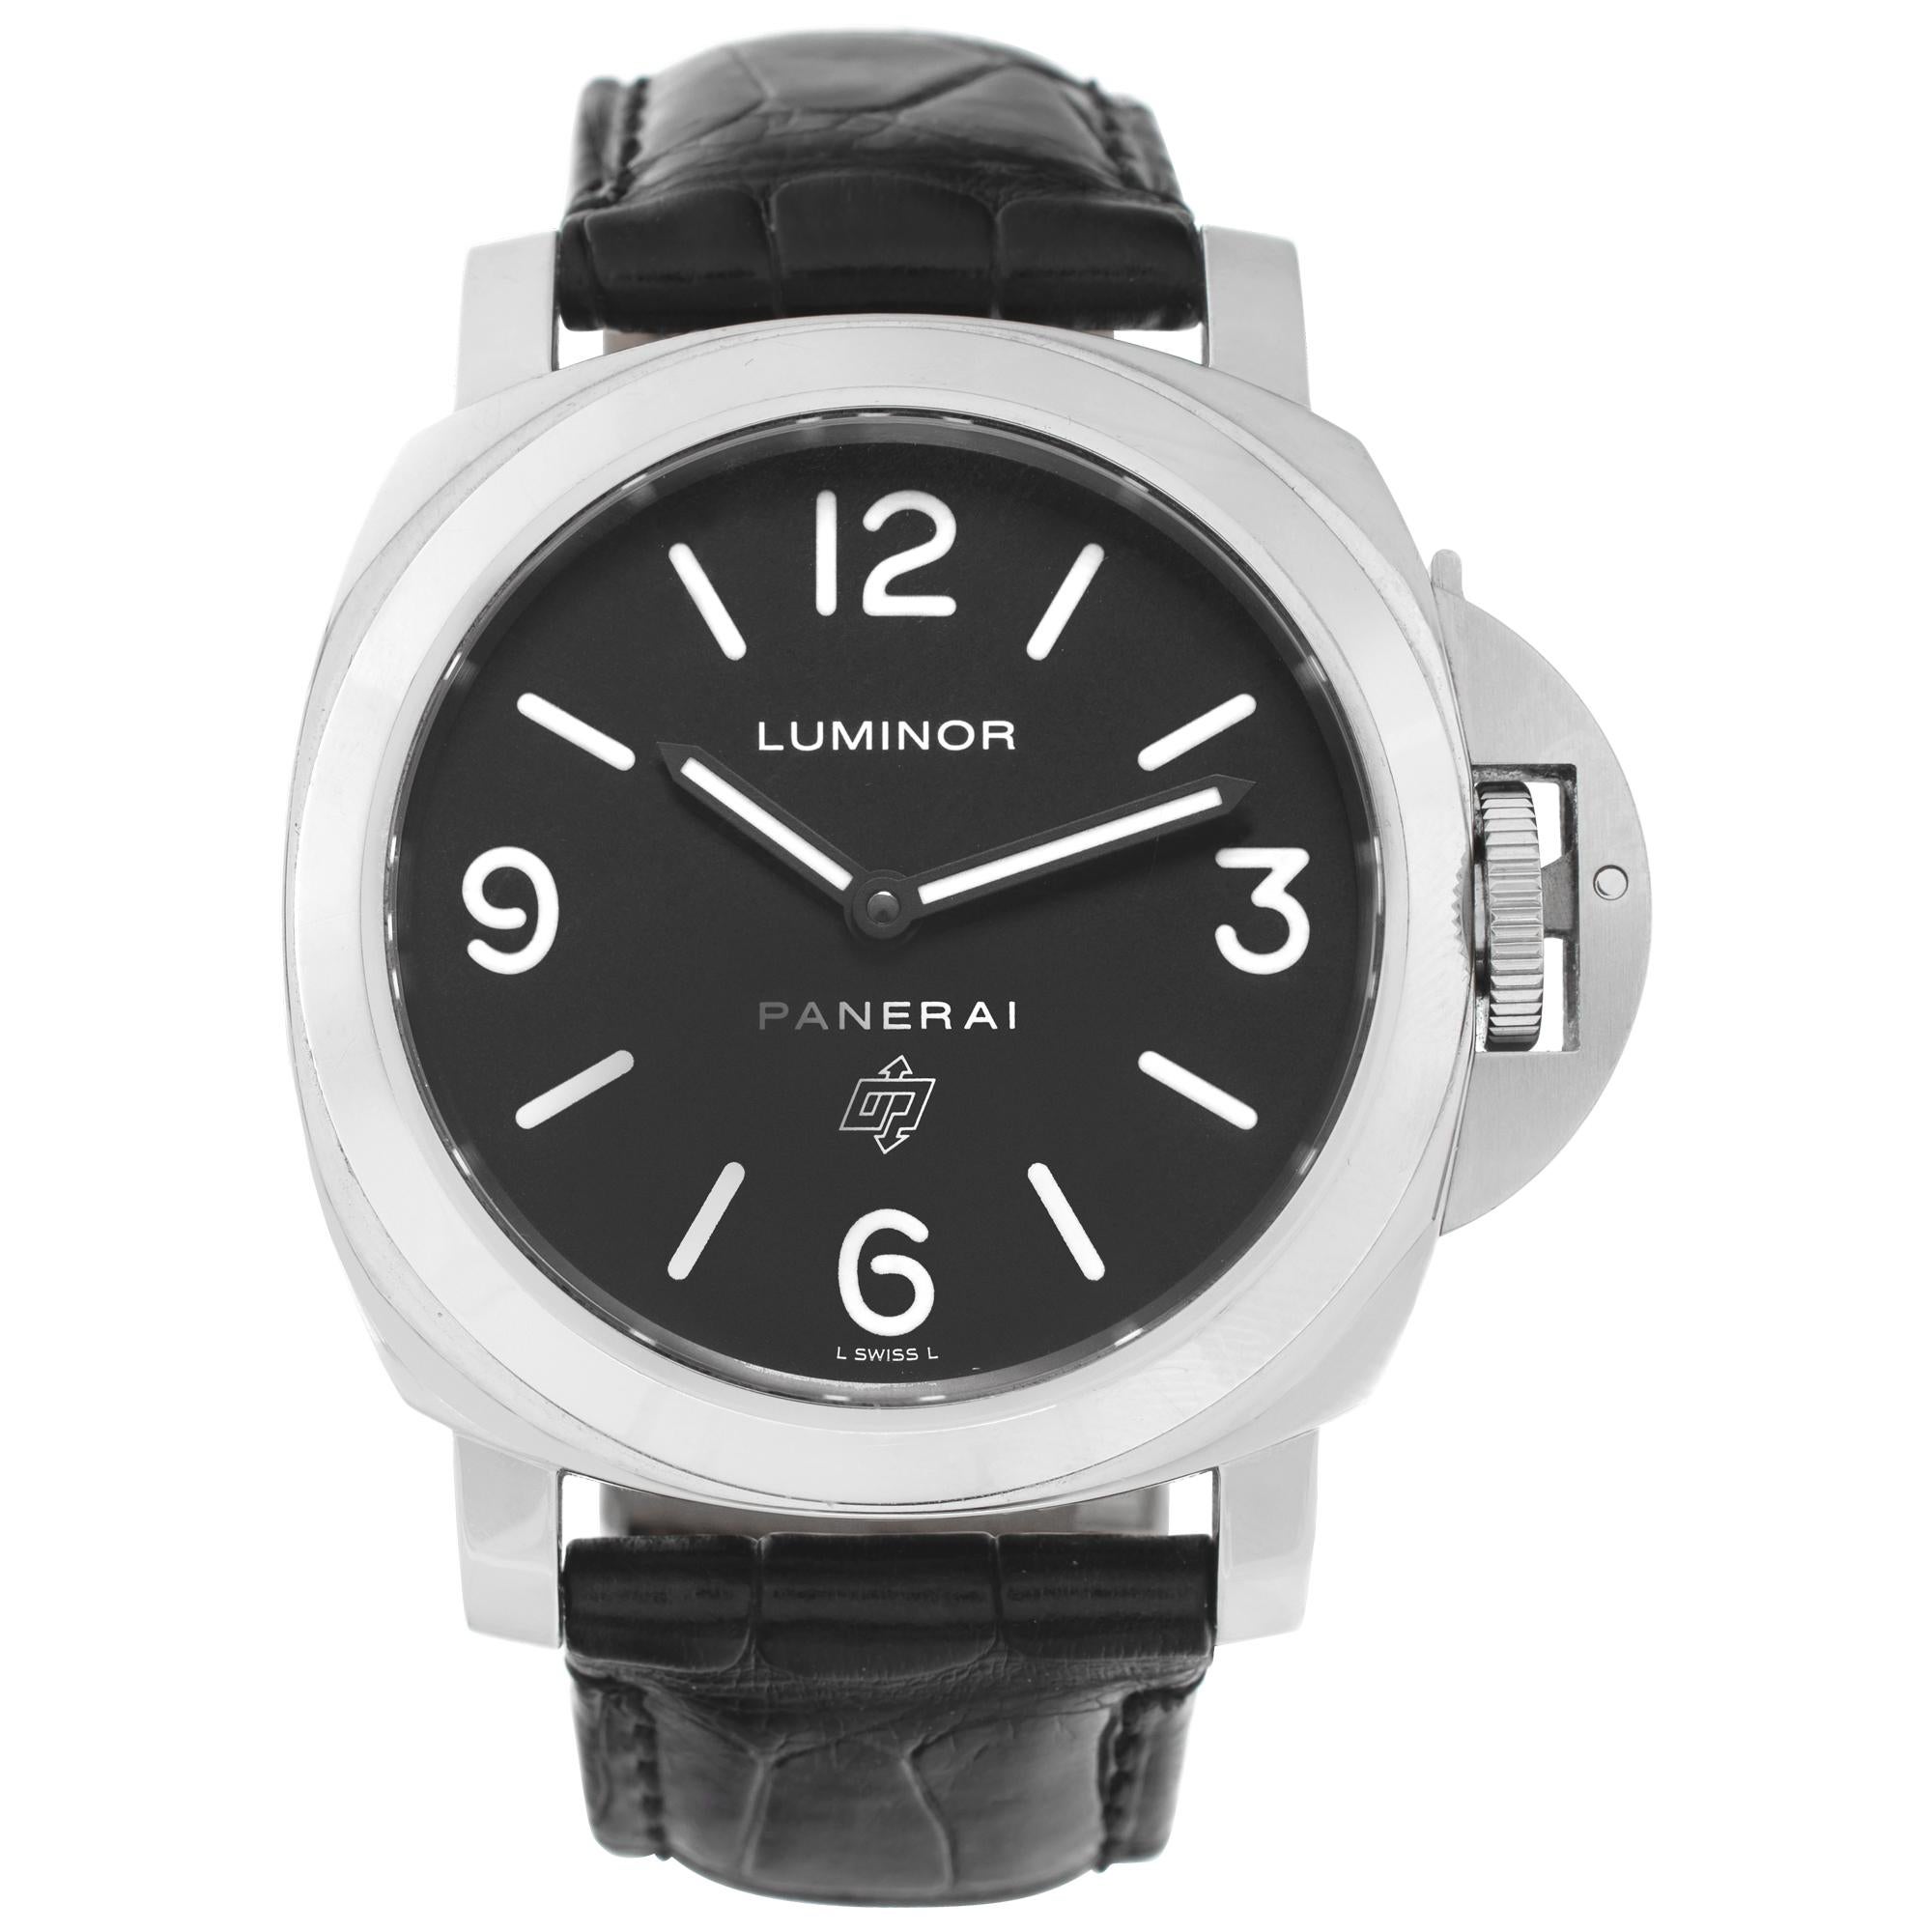 Panerai Luminor PAM000 in Stainless Steel with a Black dial 44mm Automatic watch